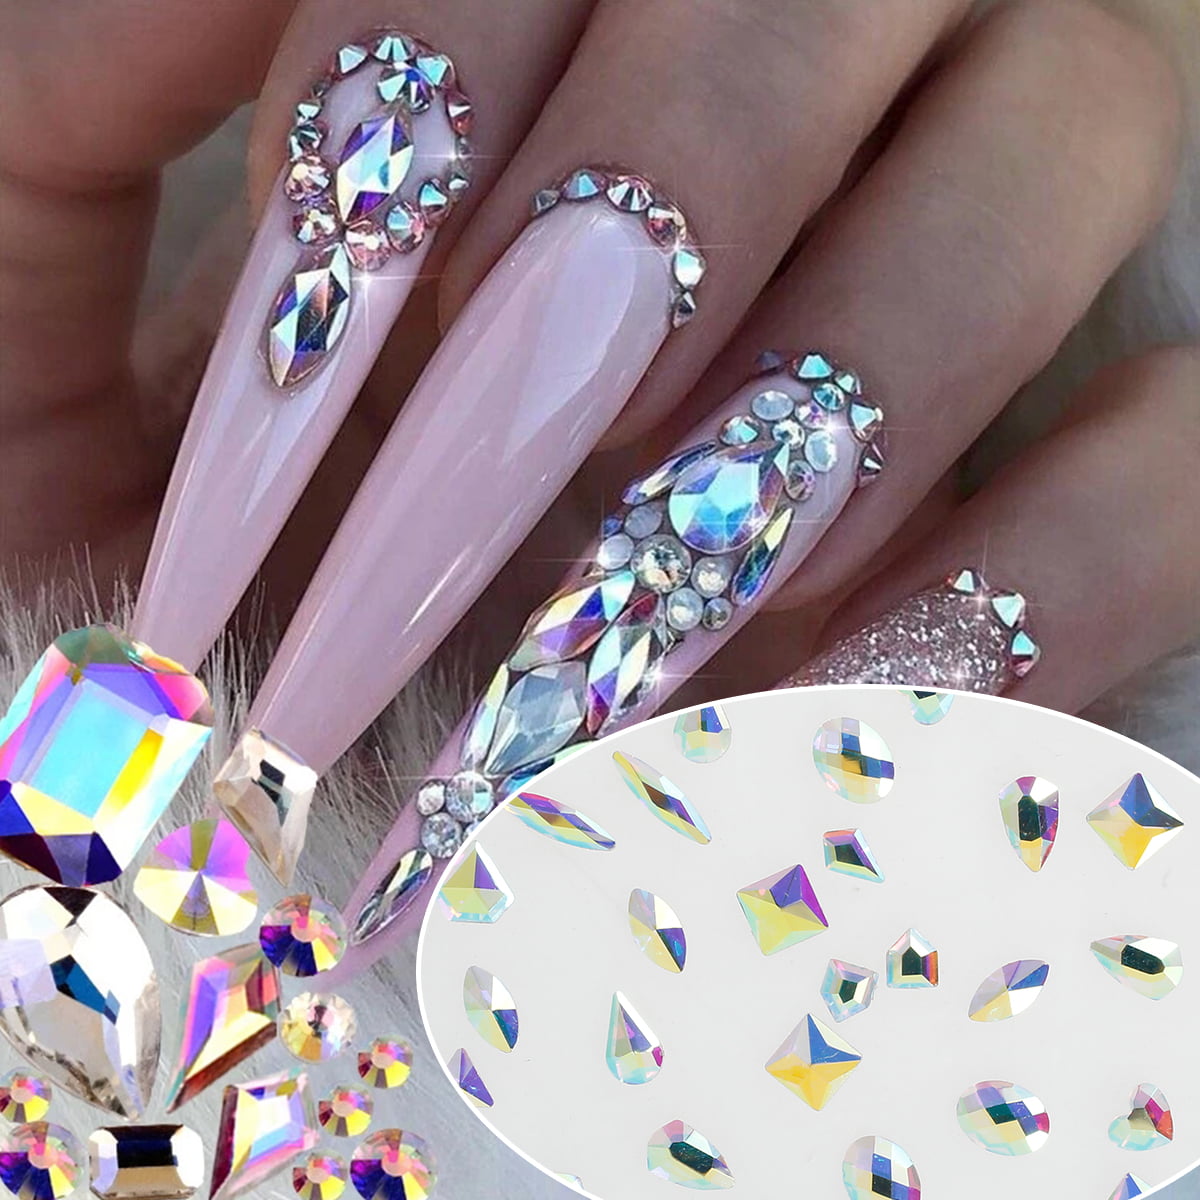 Acrylic Nail Art Rhinestone Kit With 21 Grids, Mixed Sizes, Pick Up Pen,  Large Crystals Nails Decorations, 3D AB Flat Gem Set From Xx_makei, $24.68